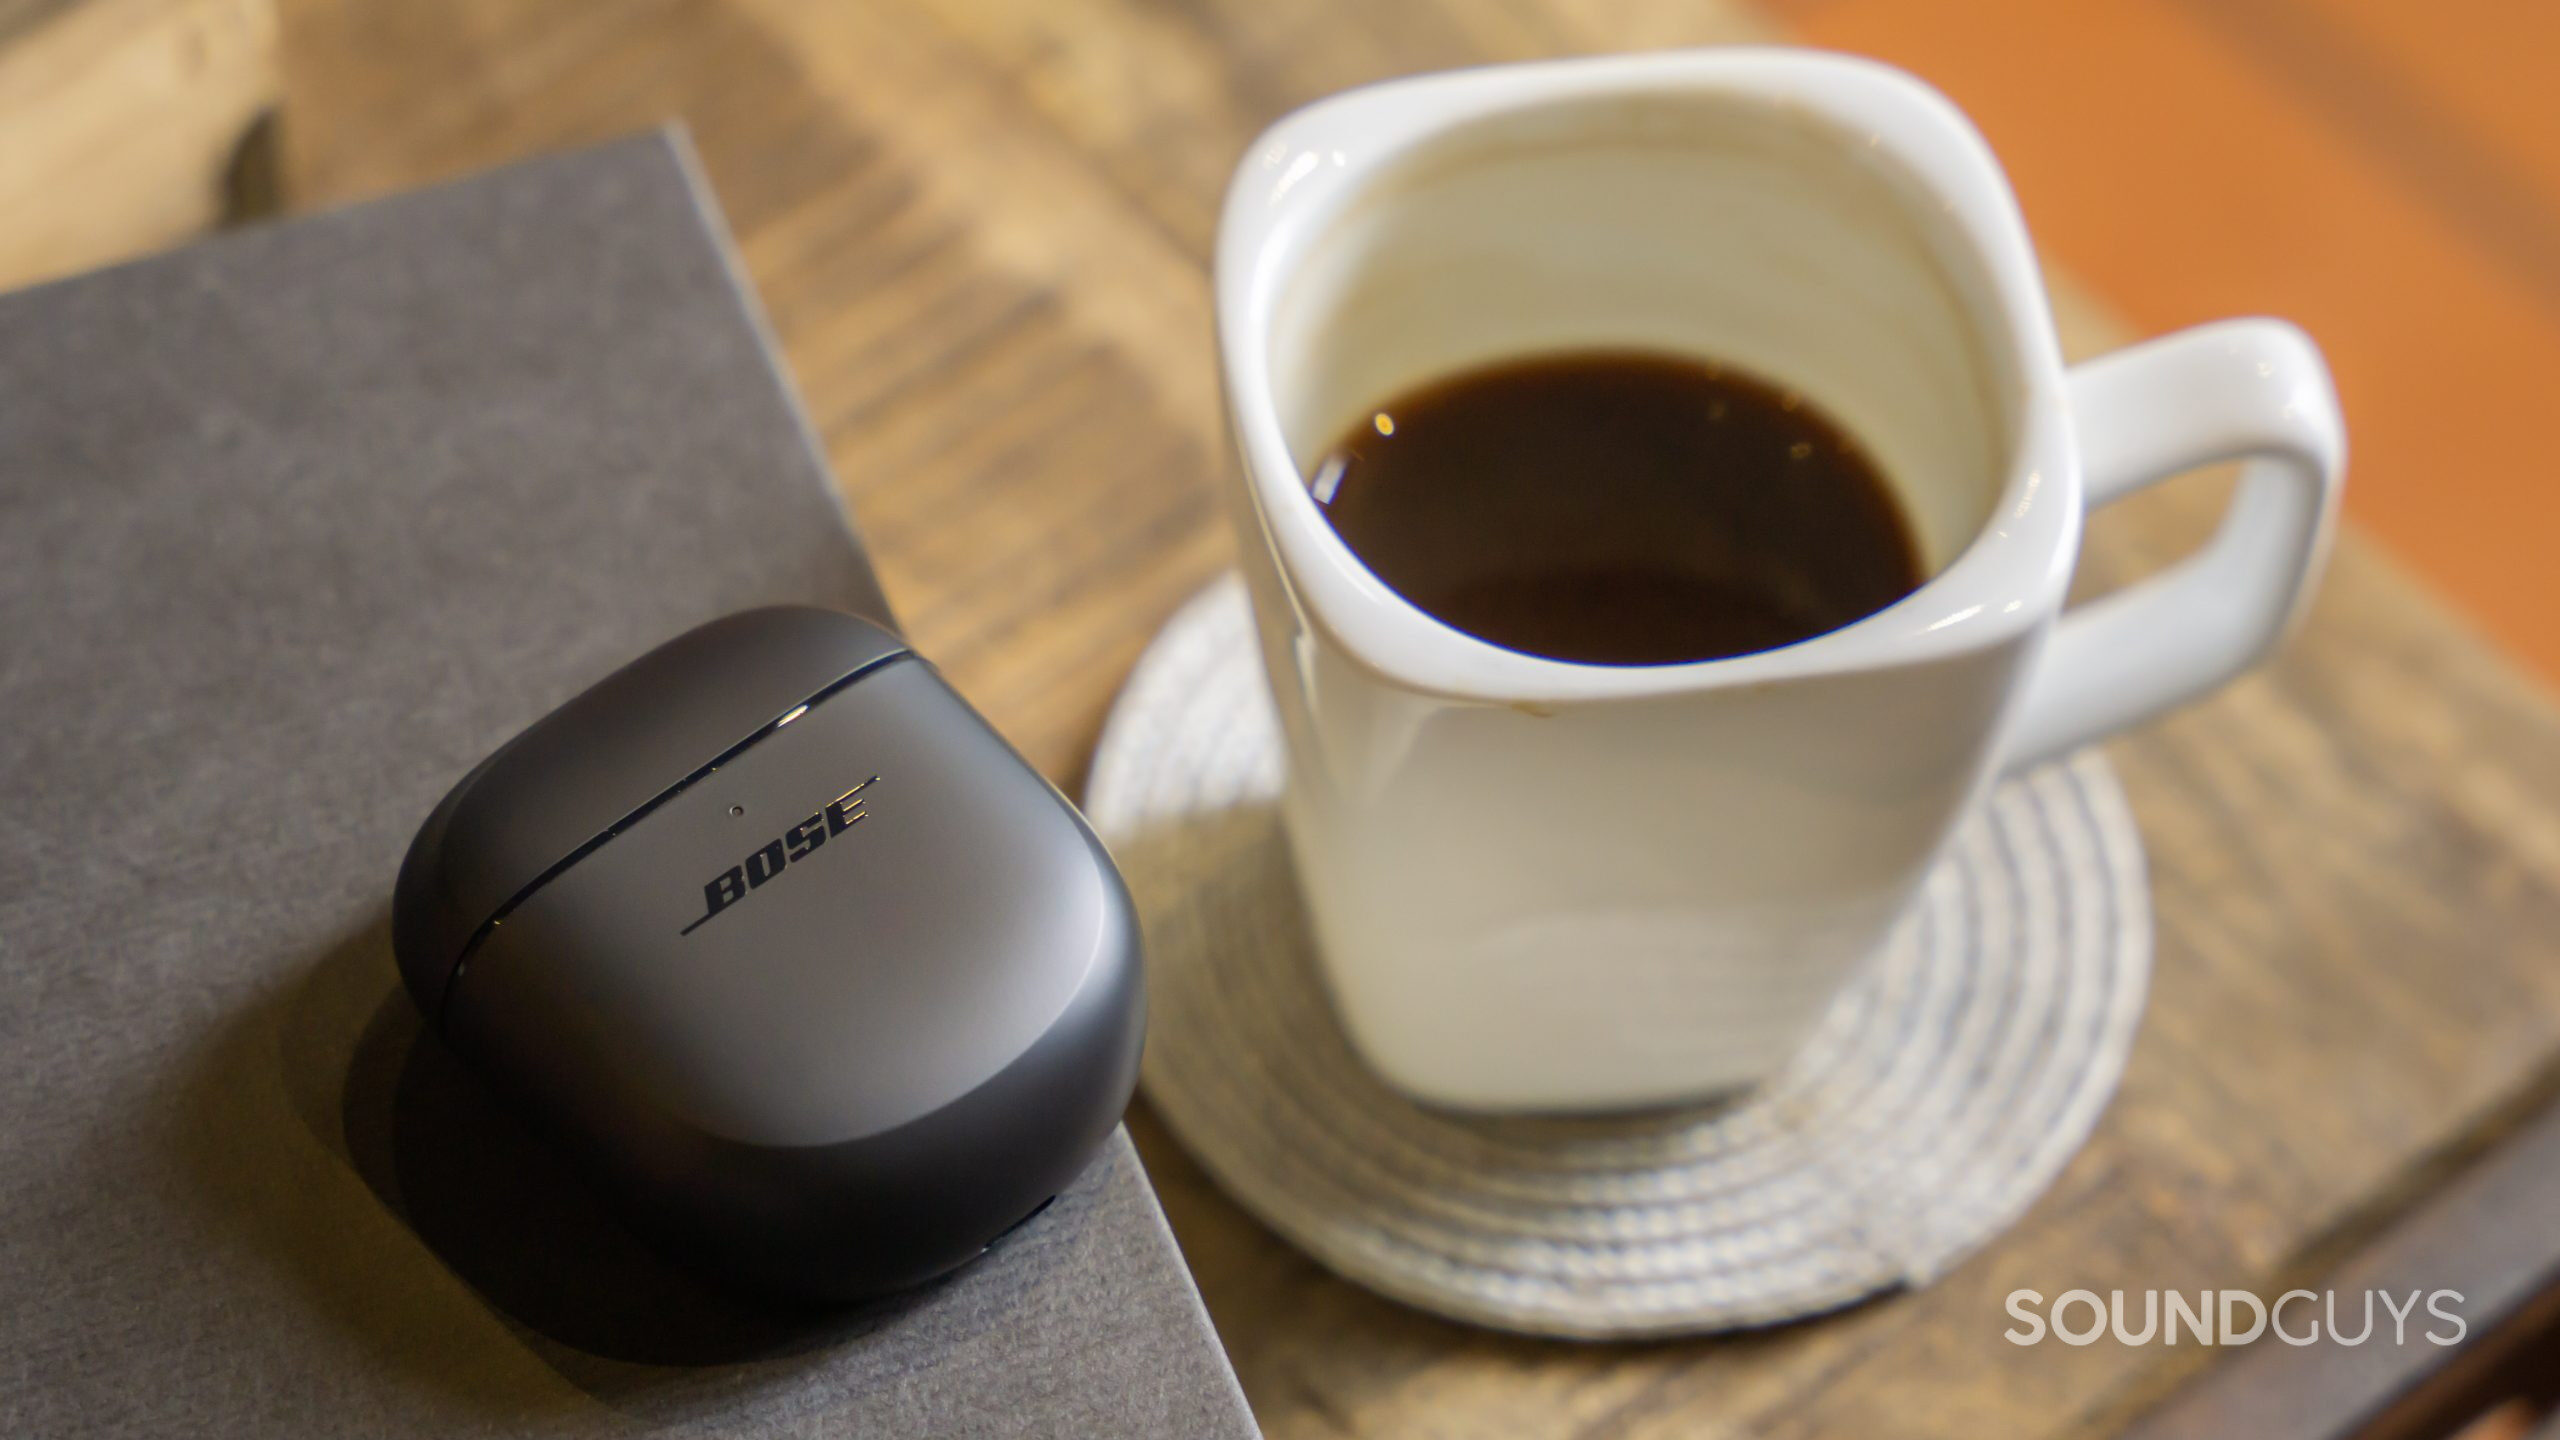 The Bose QuietComfort Earbuds II case rests next to a table and coffee mug.